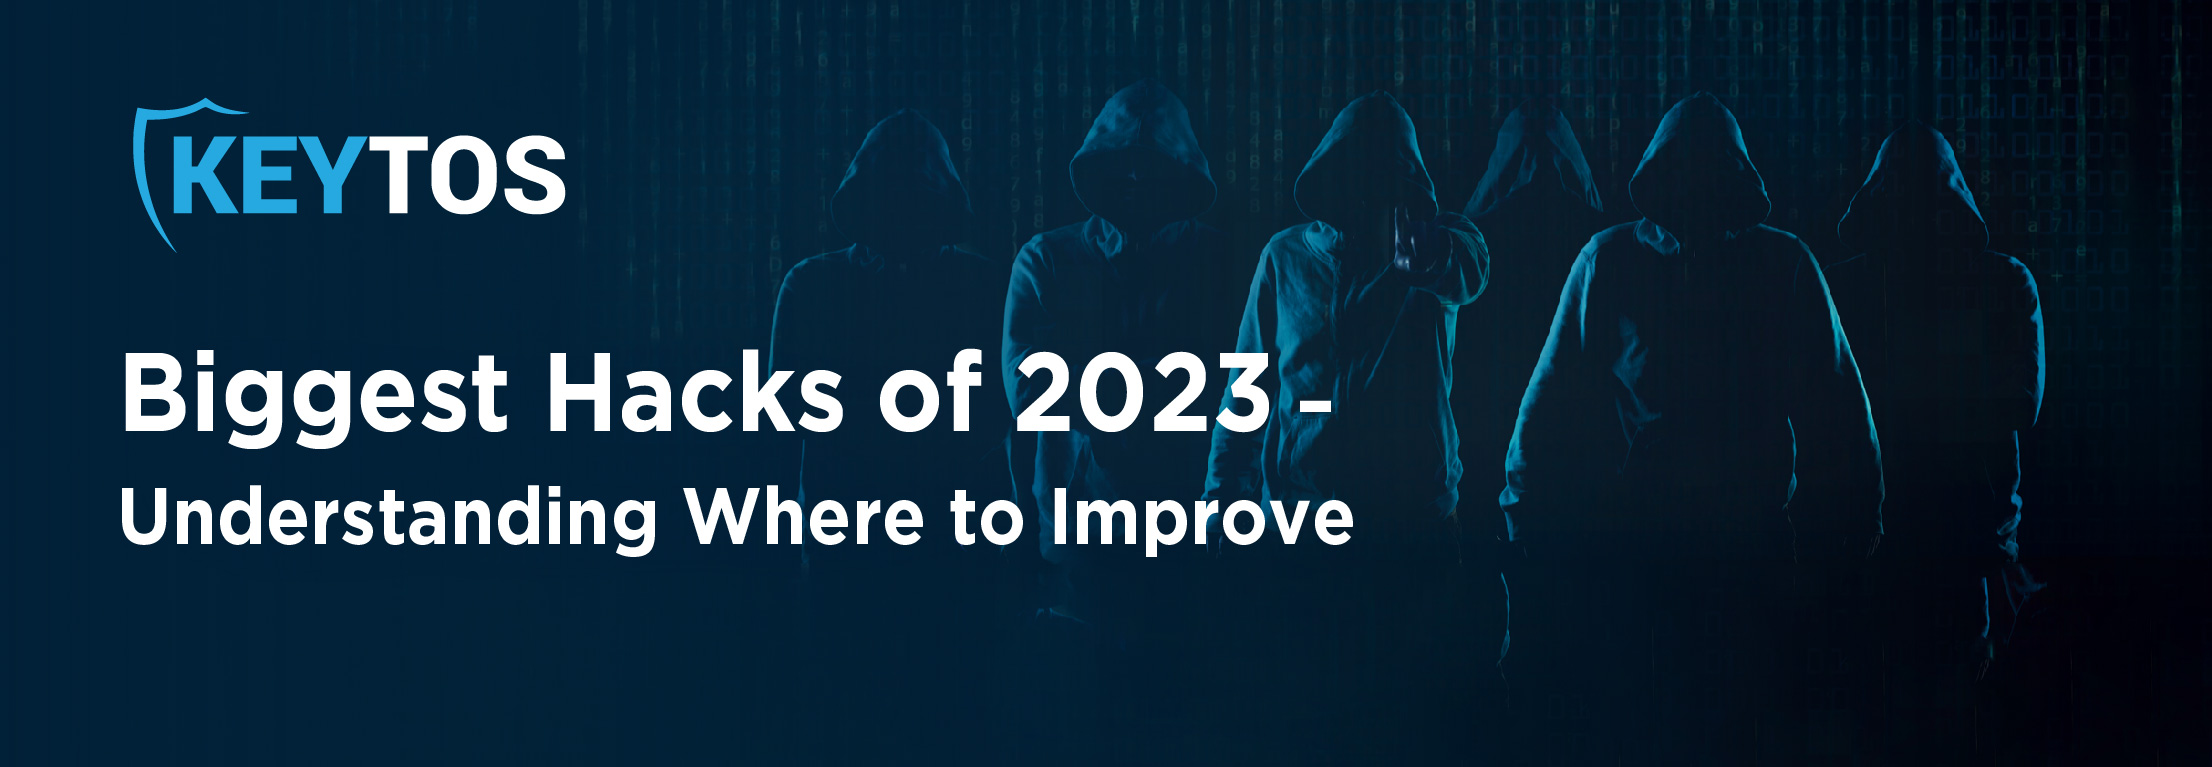 Takeaways from the biggest cybersecurity hacks of 2023.